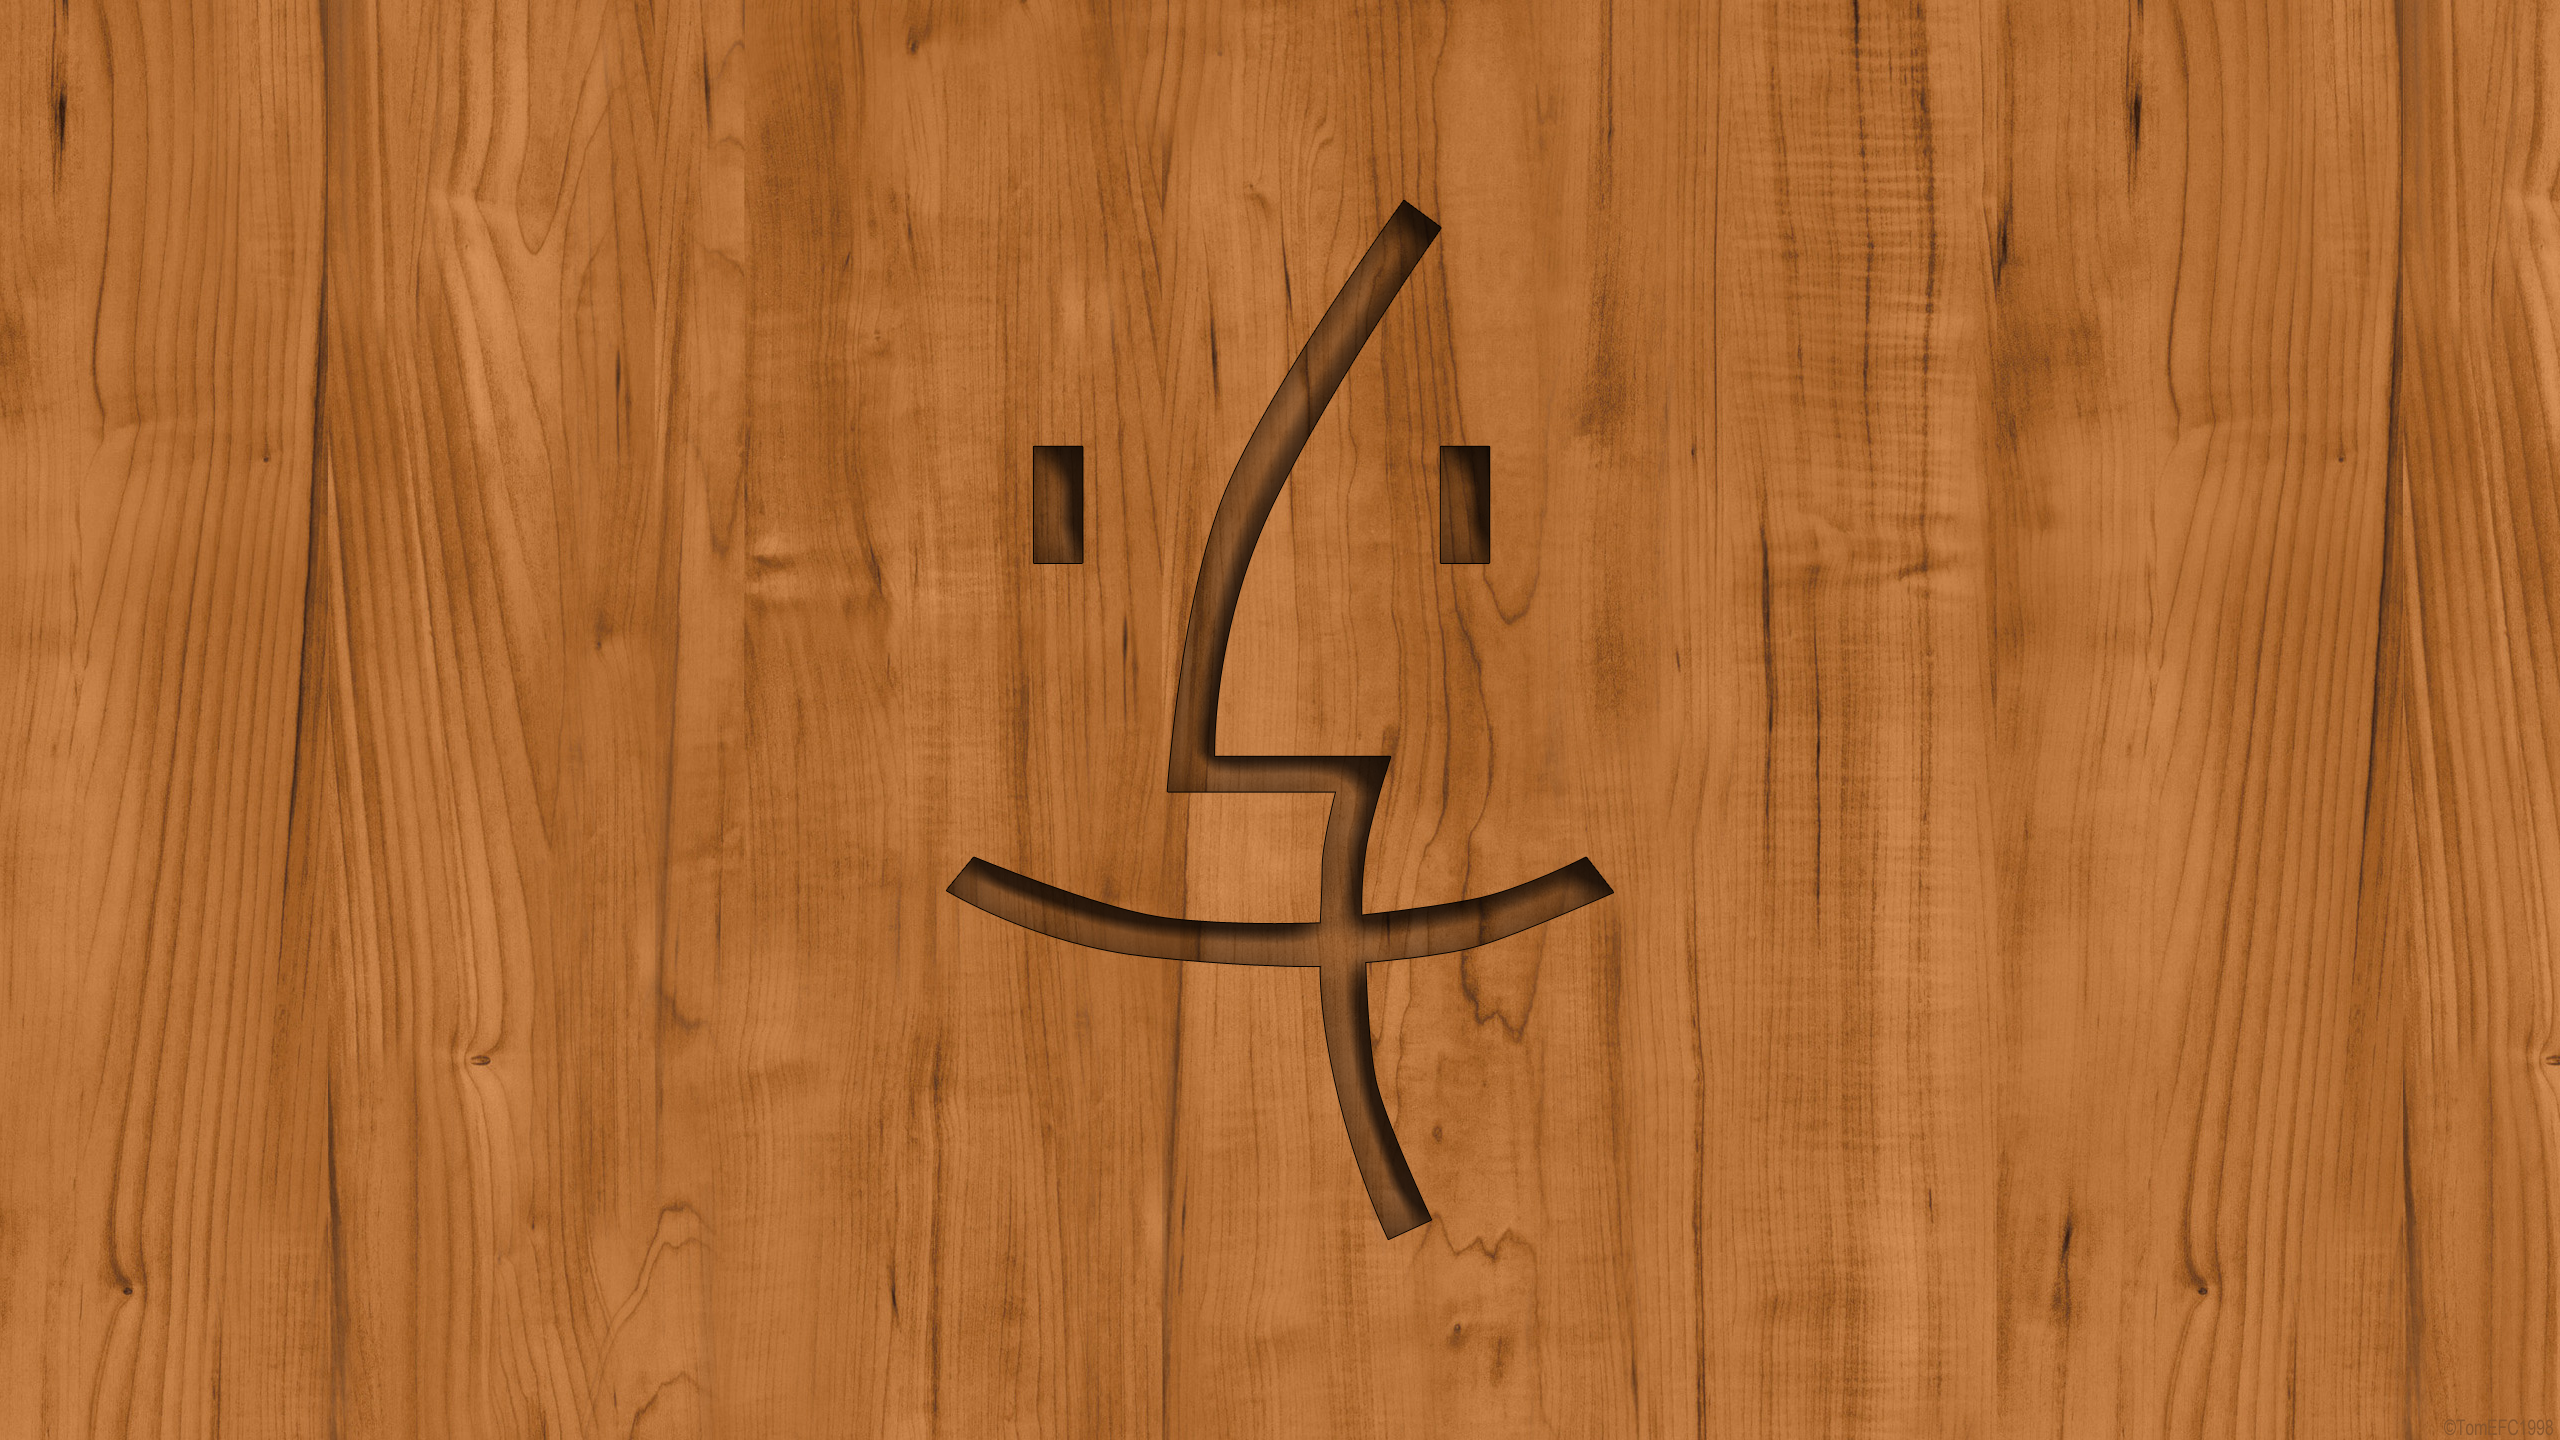 Apple Face iFile Logo Wood Wallpaper by TomEFC98 on DeviantArt